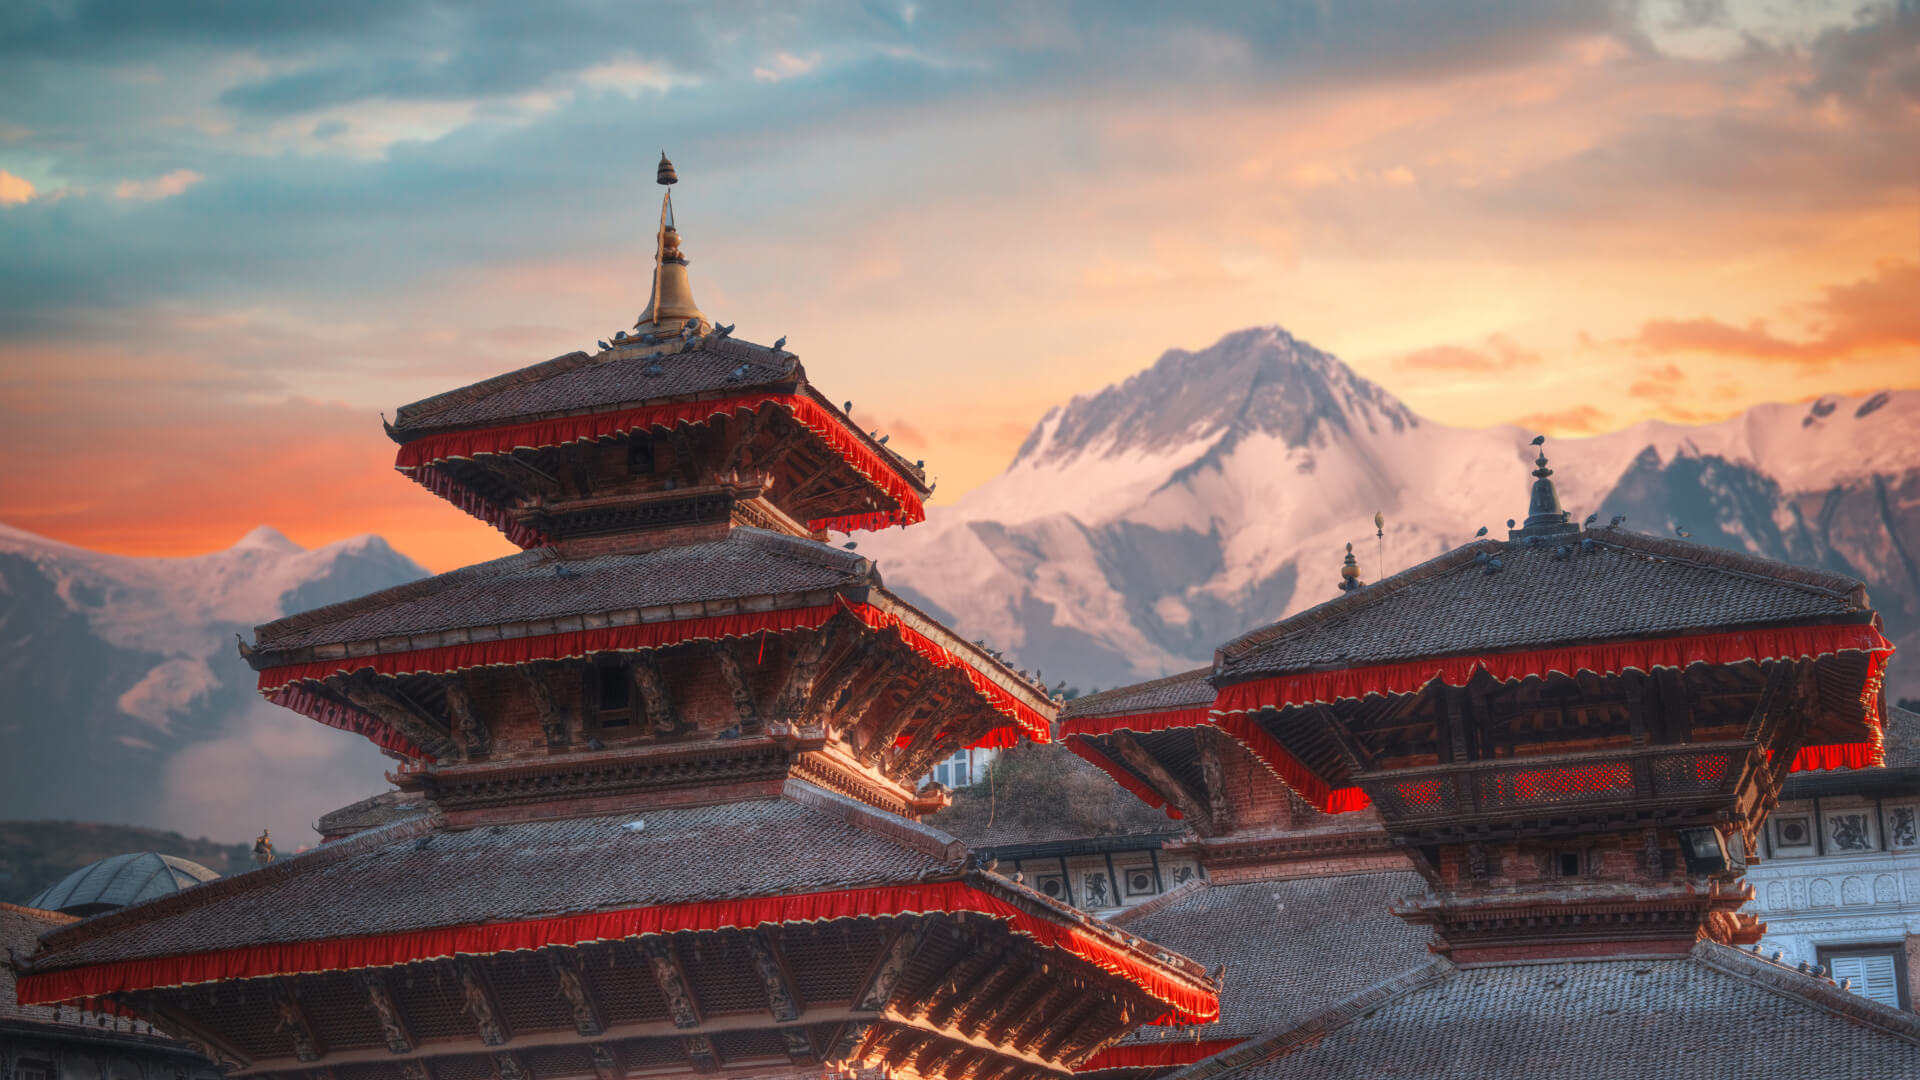 A temple with a pagoda roof in front of a mountain range and orange sunset